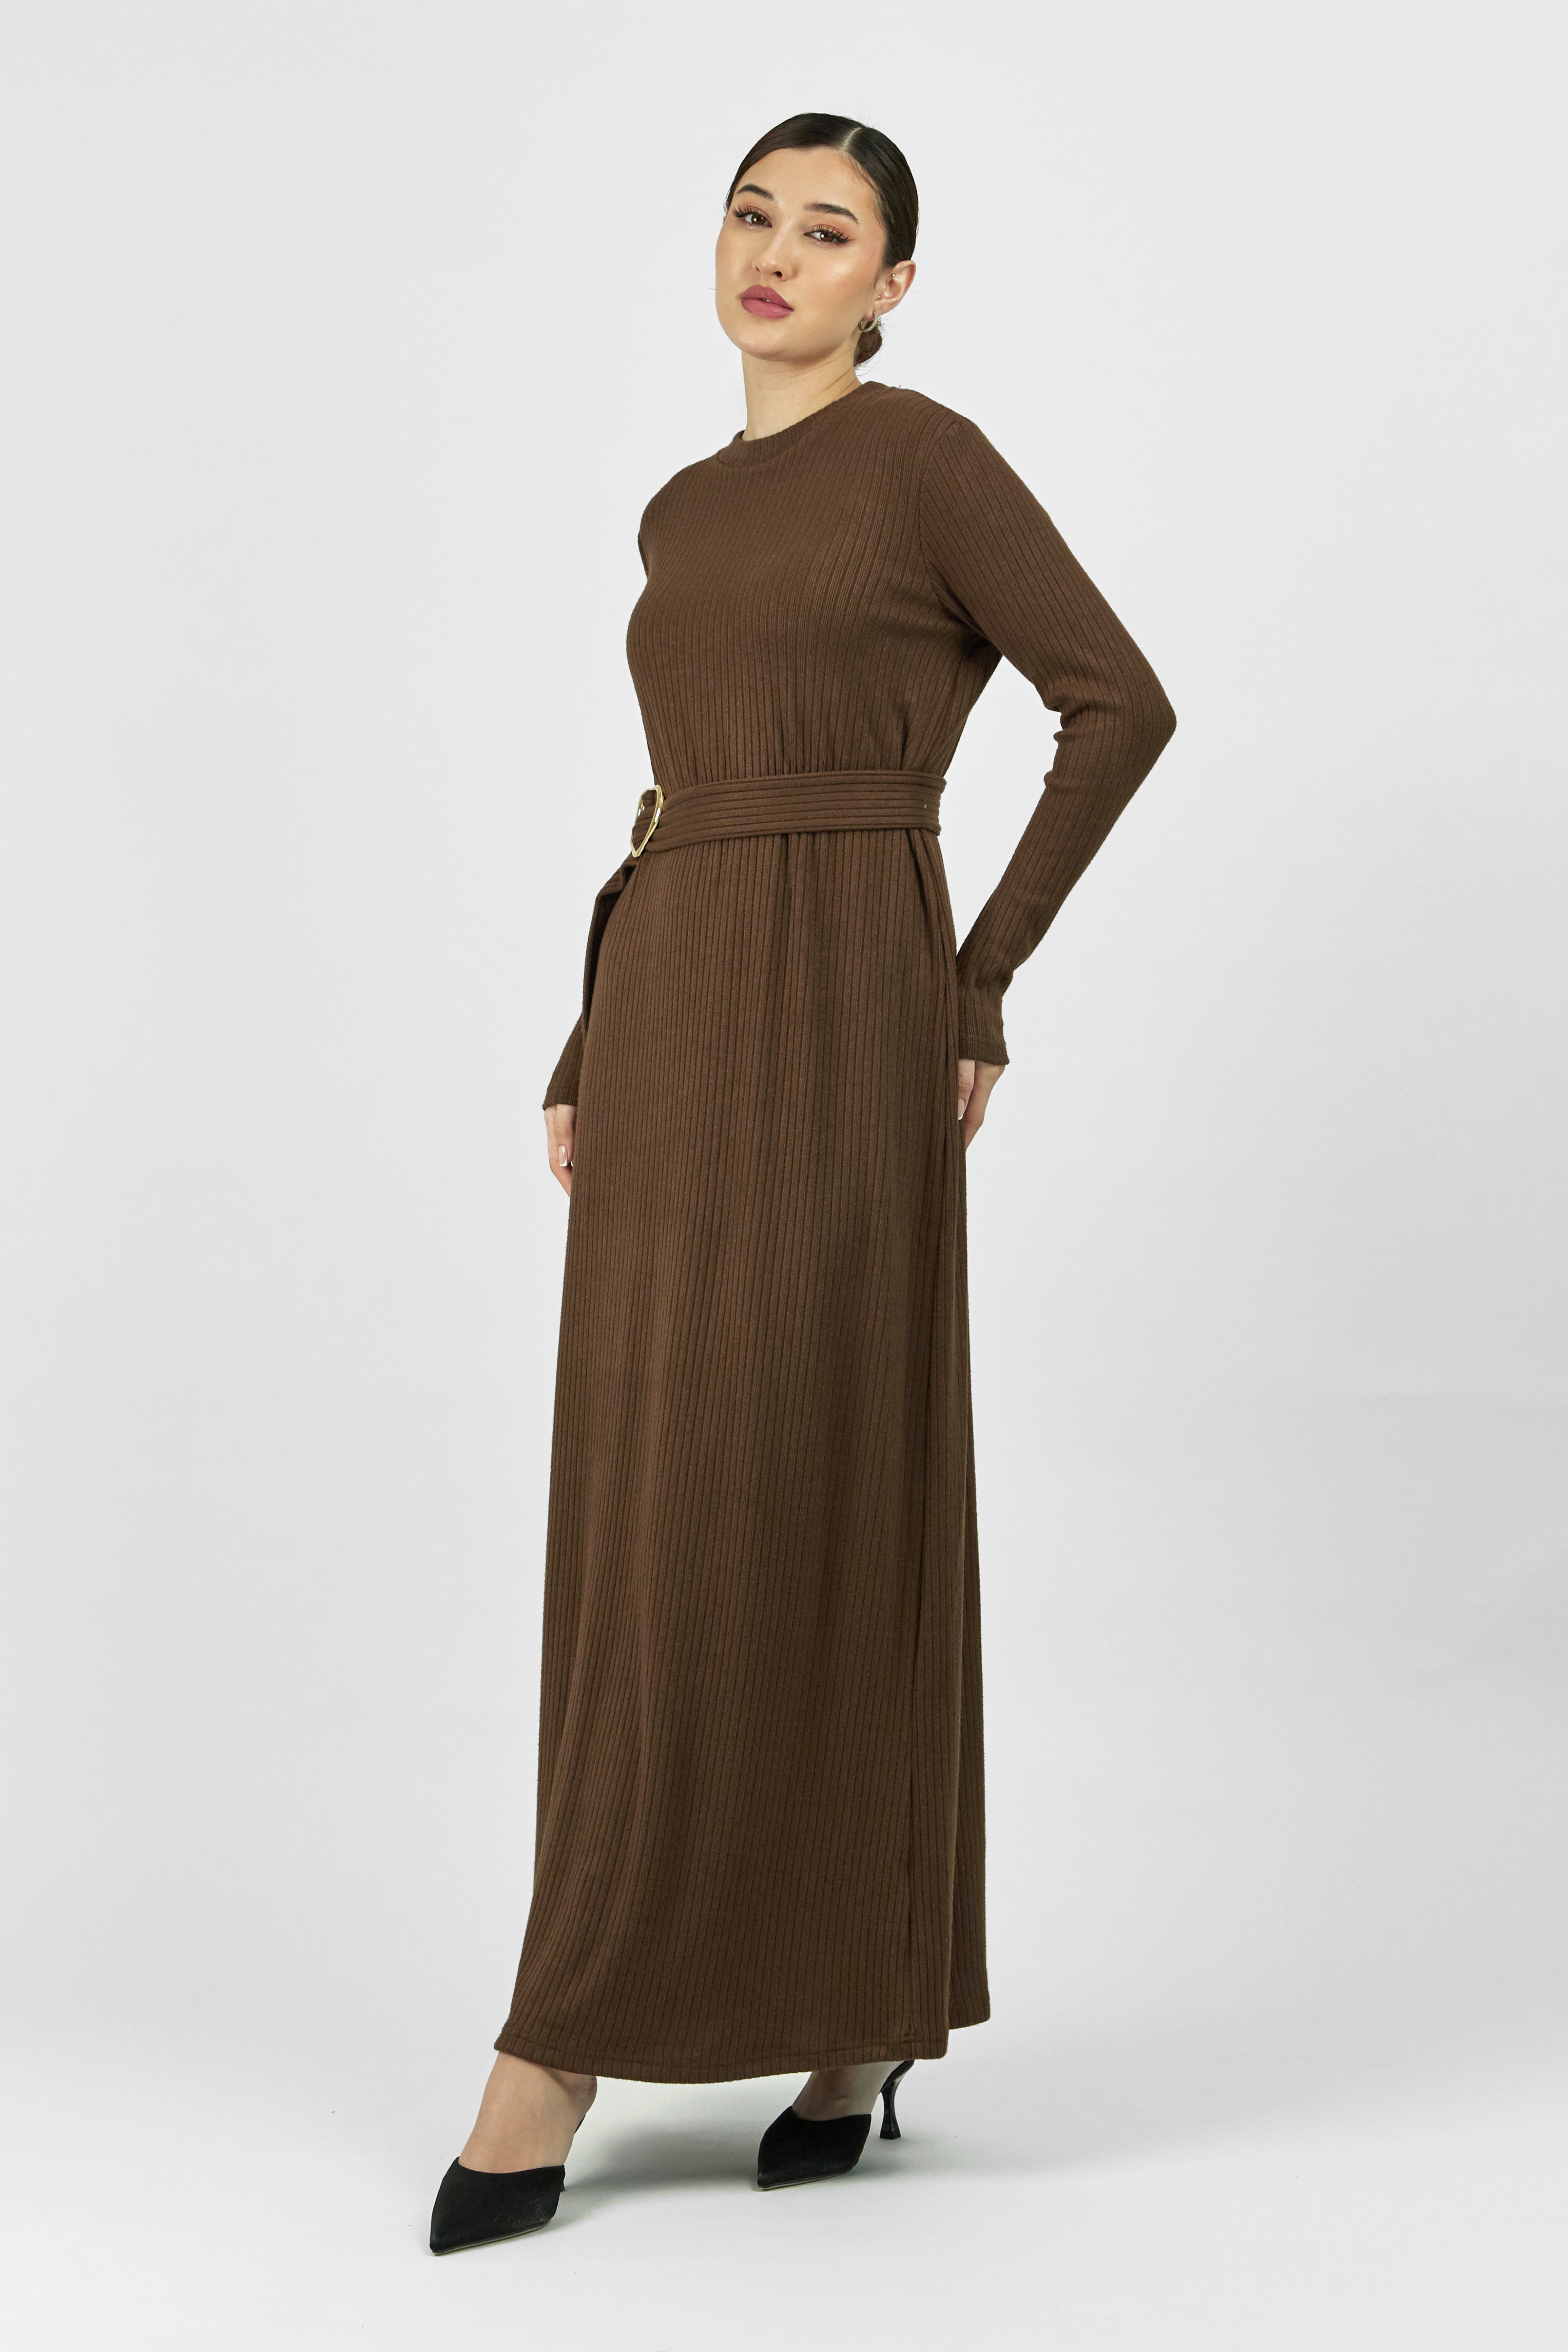 AE - Belted Knit Dress - Americano